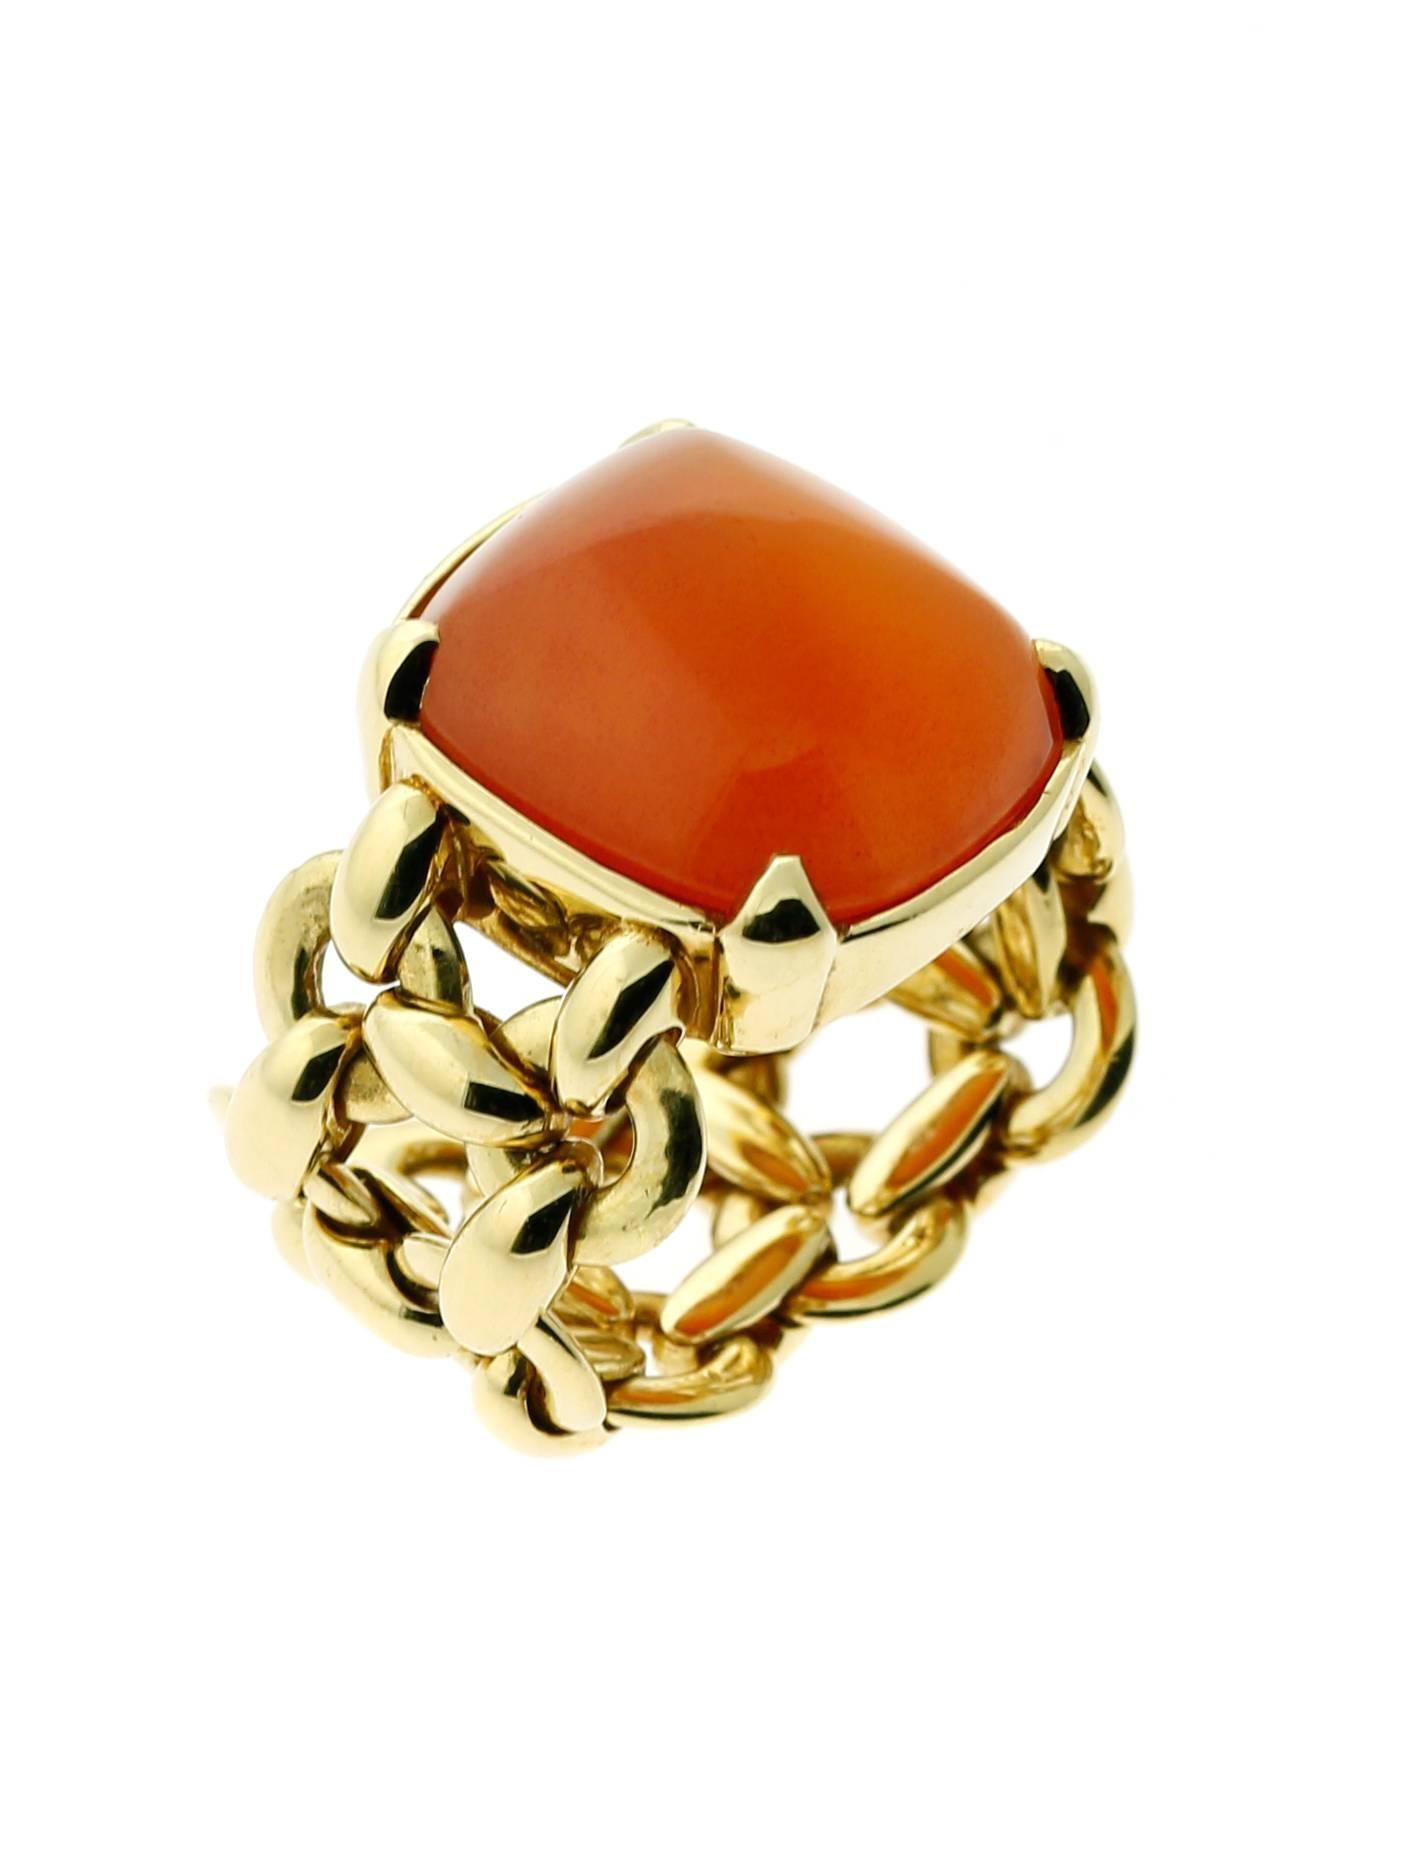 A fantastic Hermes chain link design ring in 18k yellow gold featuring a sugar loaf gemstone. The ring has a length of .70" by .59"

Size 5 3/4

Inventory ID: 0000333